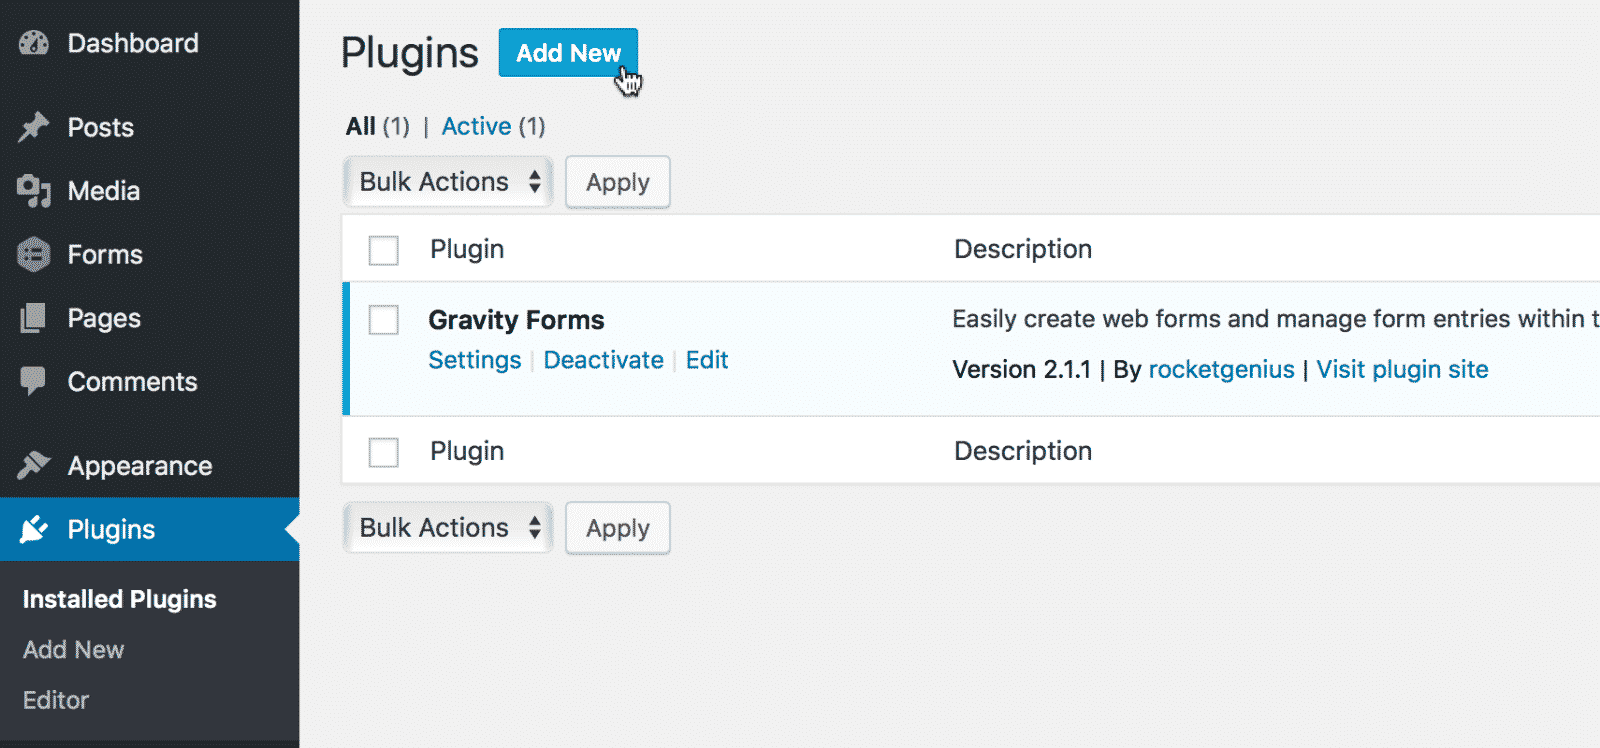 The Add New button on the WordPress Plugins page